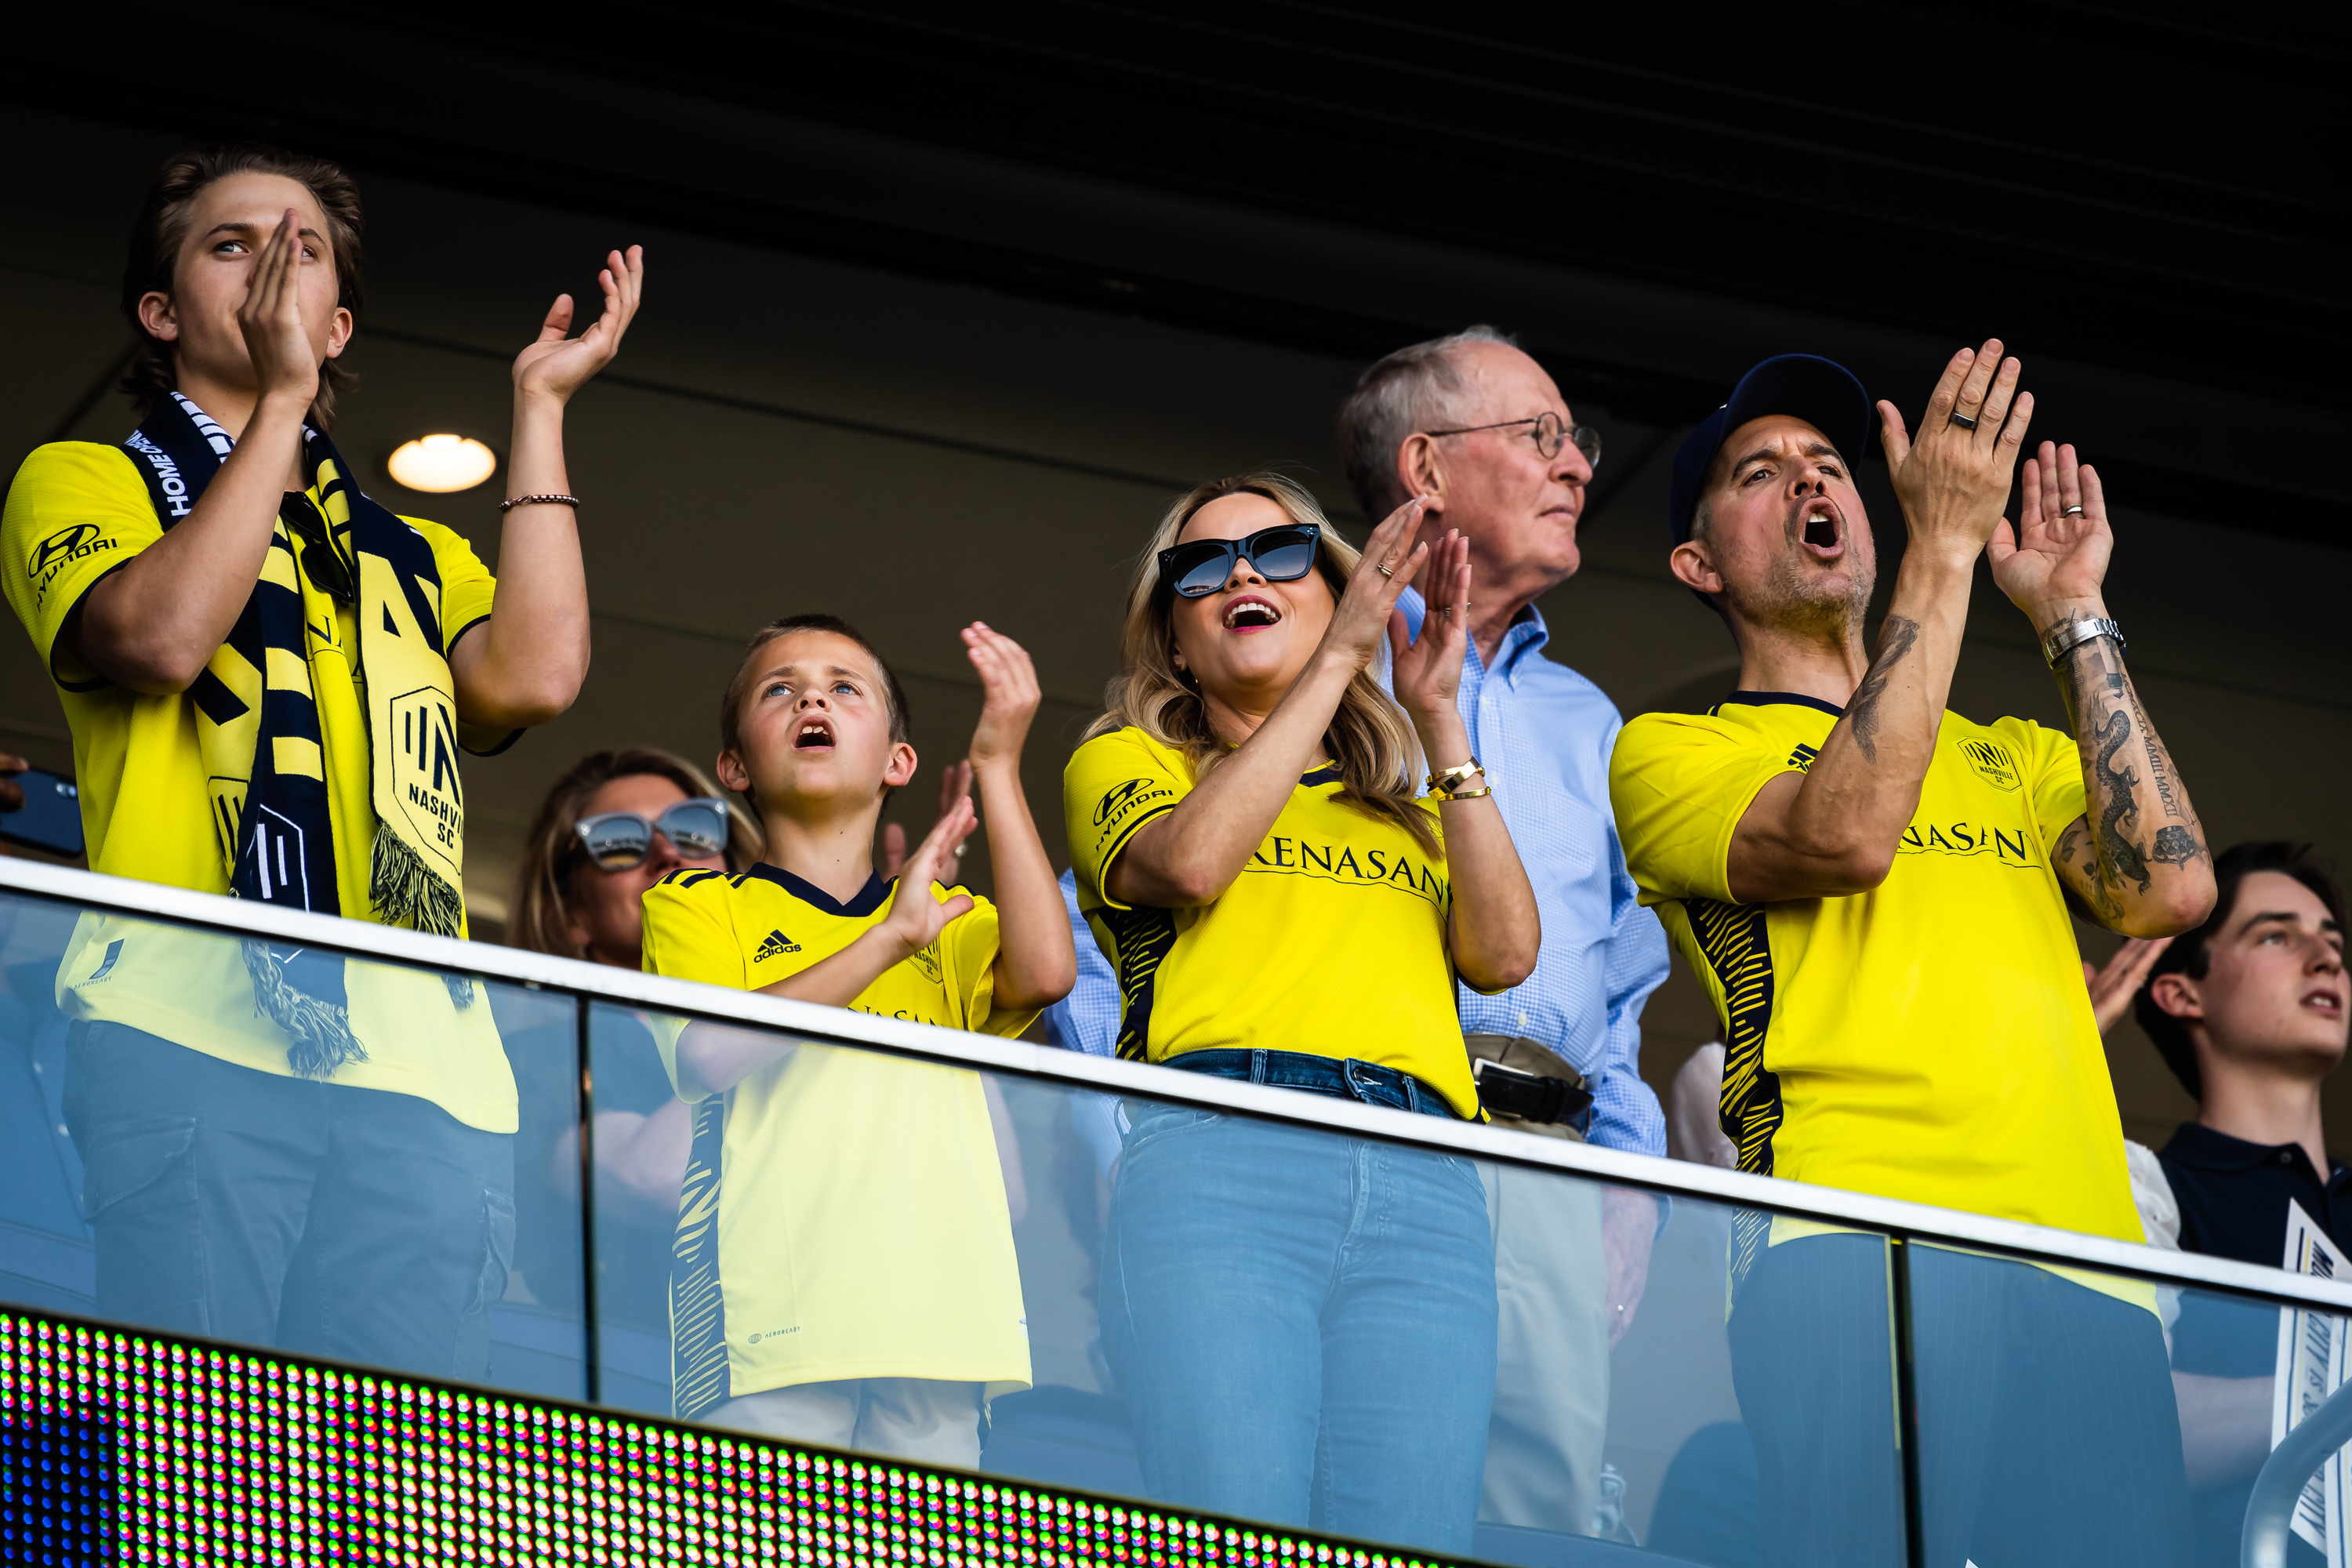 A family wearing yellow jerseys cheer during a soccer game.